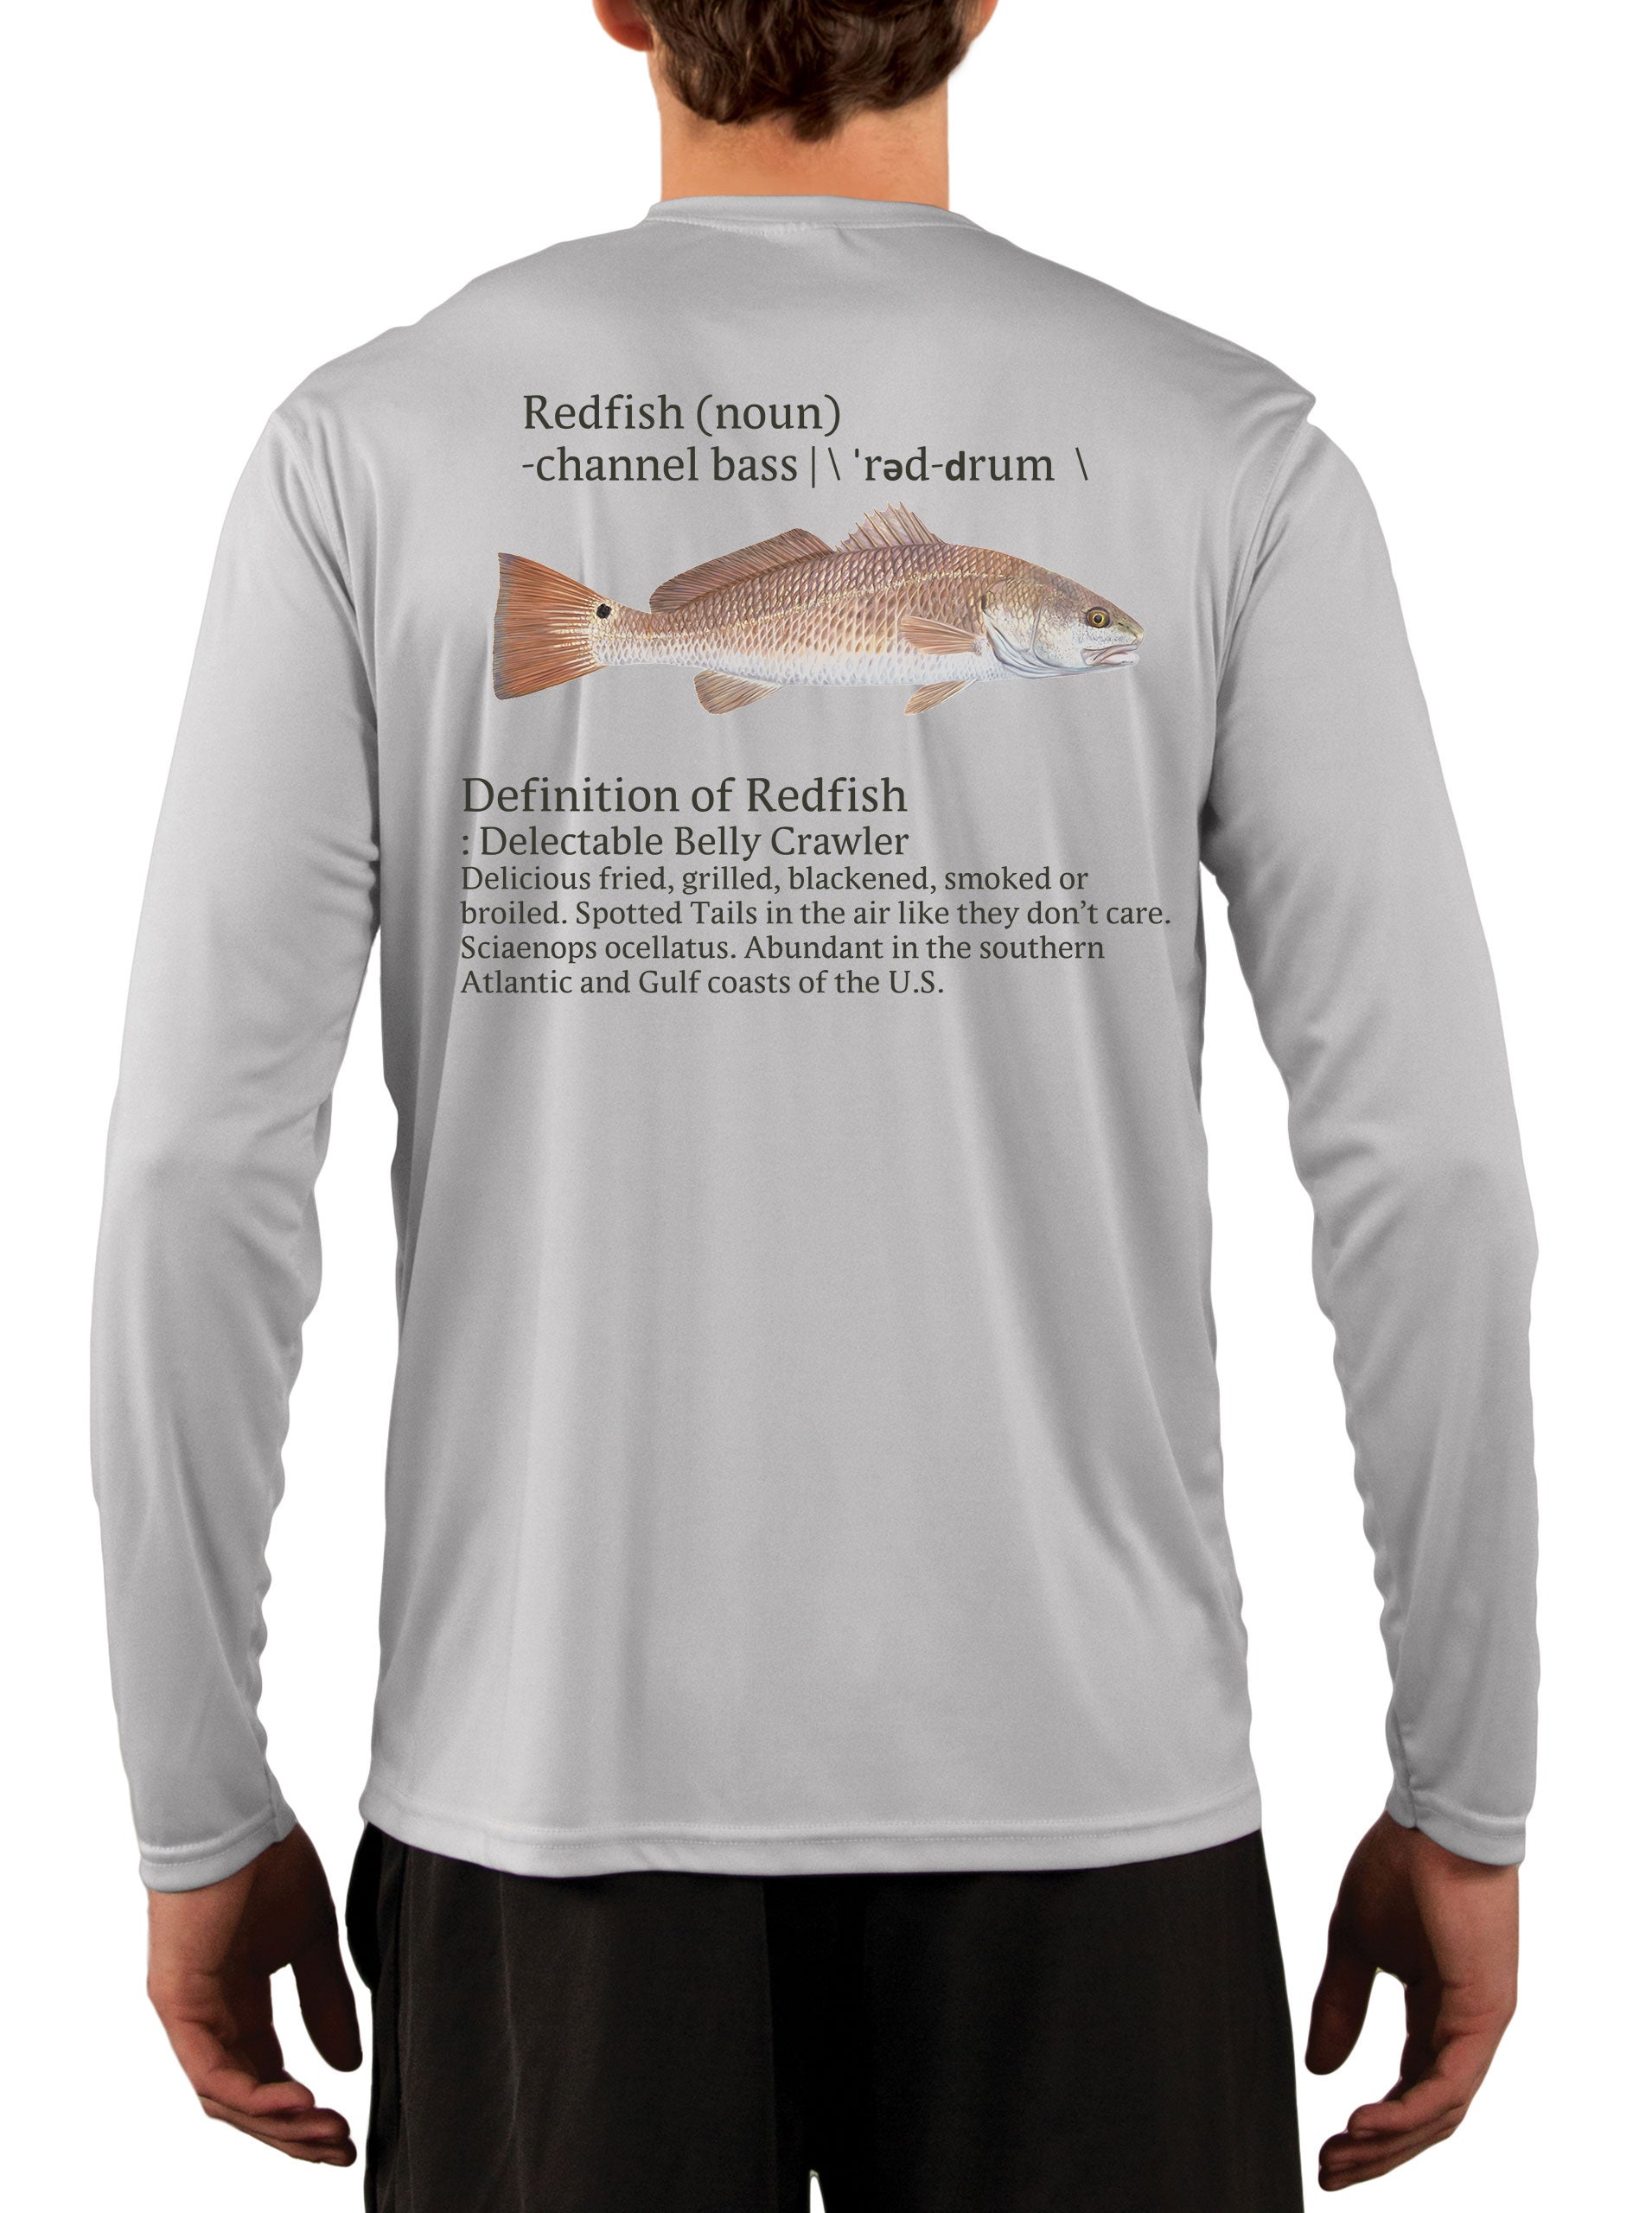 Redfish Fishing Shirts for Men Red Drum Channel Bass - UV Protected +50 Sun Protection with Moisture Wicking Technology Large / Pearl Gray